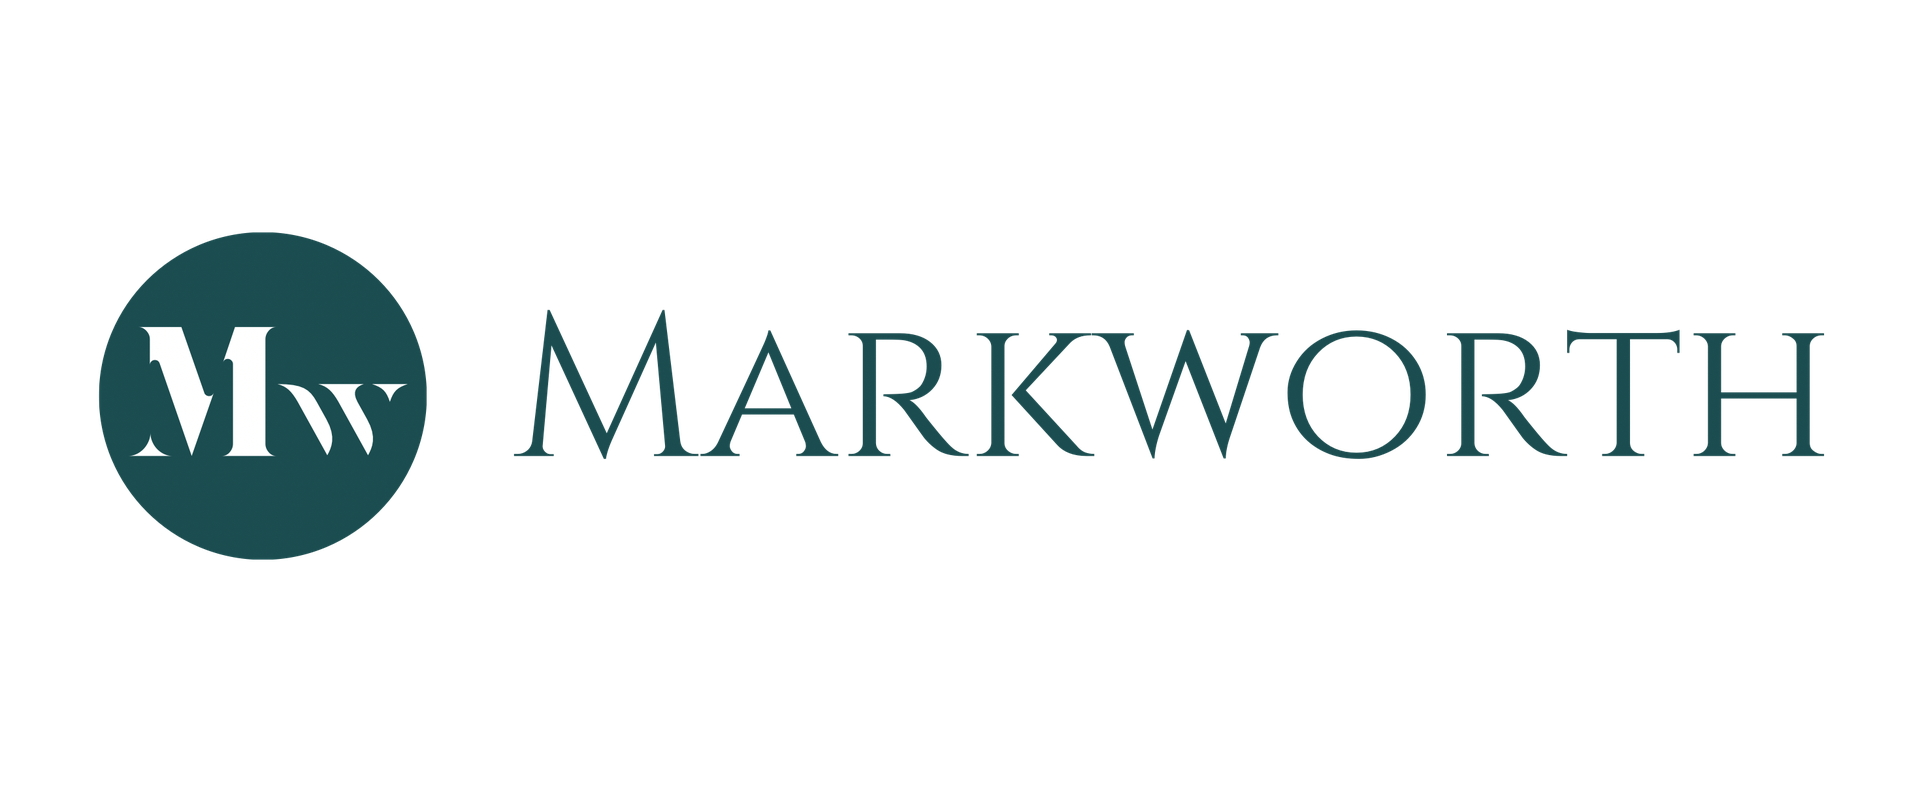 The Markworth Group